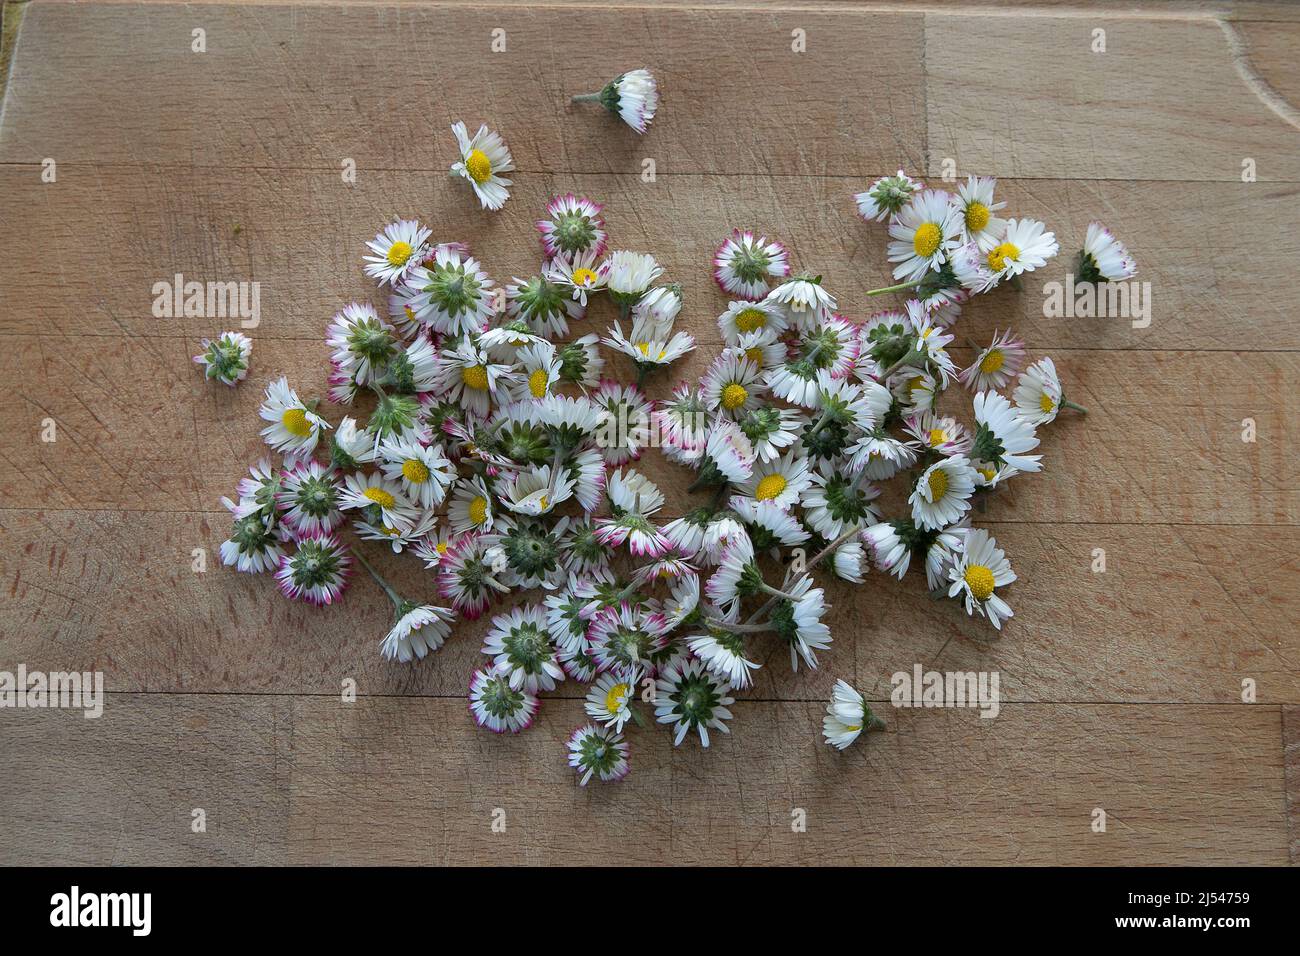 Bellis perennis, english lawn common daisy. Hand picked, fresh flowers on a wooden table ready to be dried and used as a tea. Raw, vegan, healthy Stock Photo